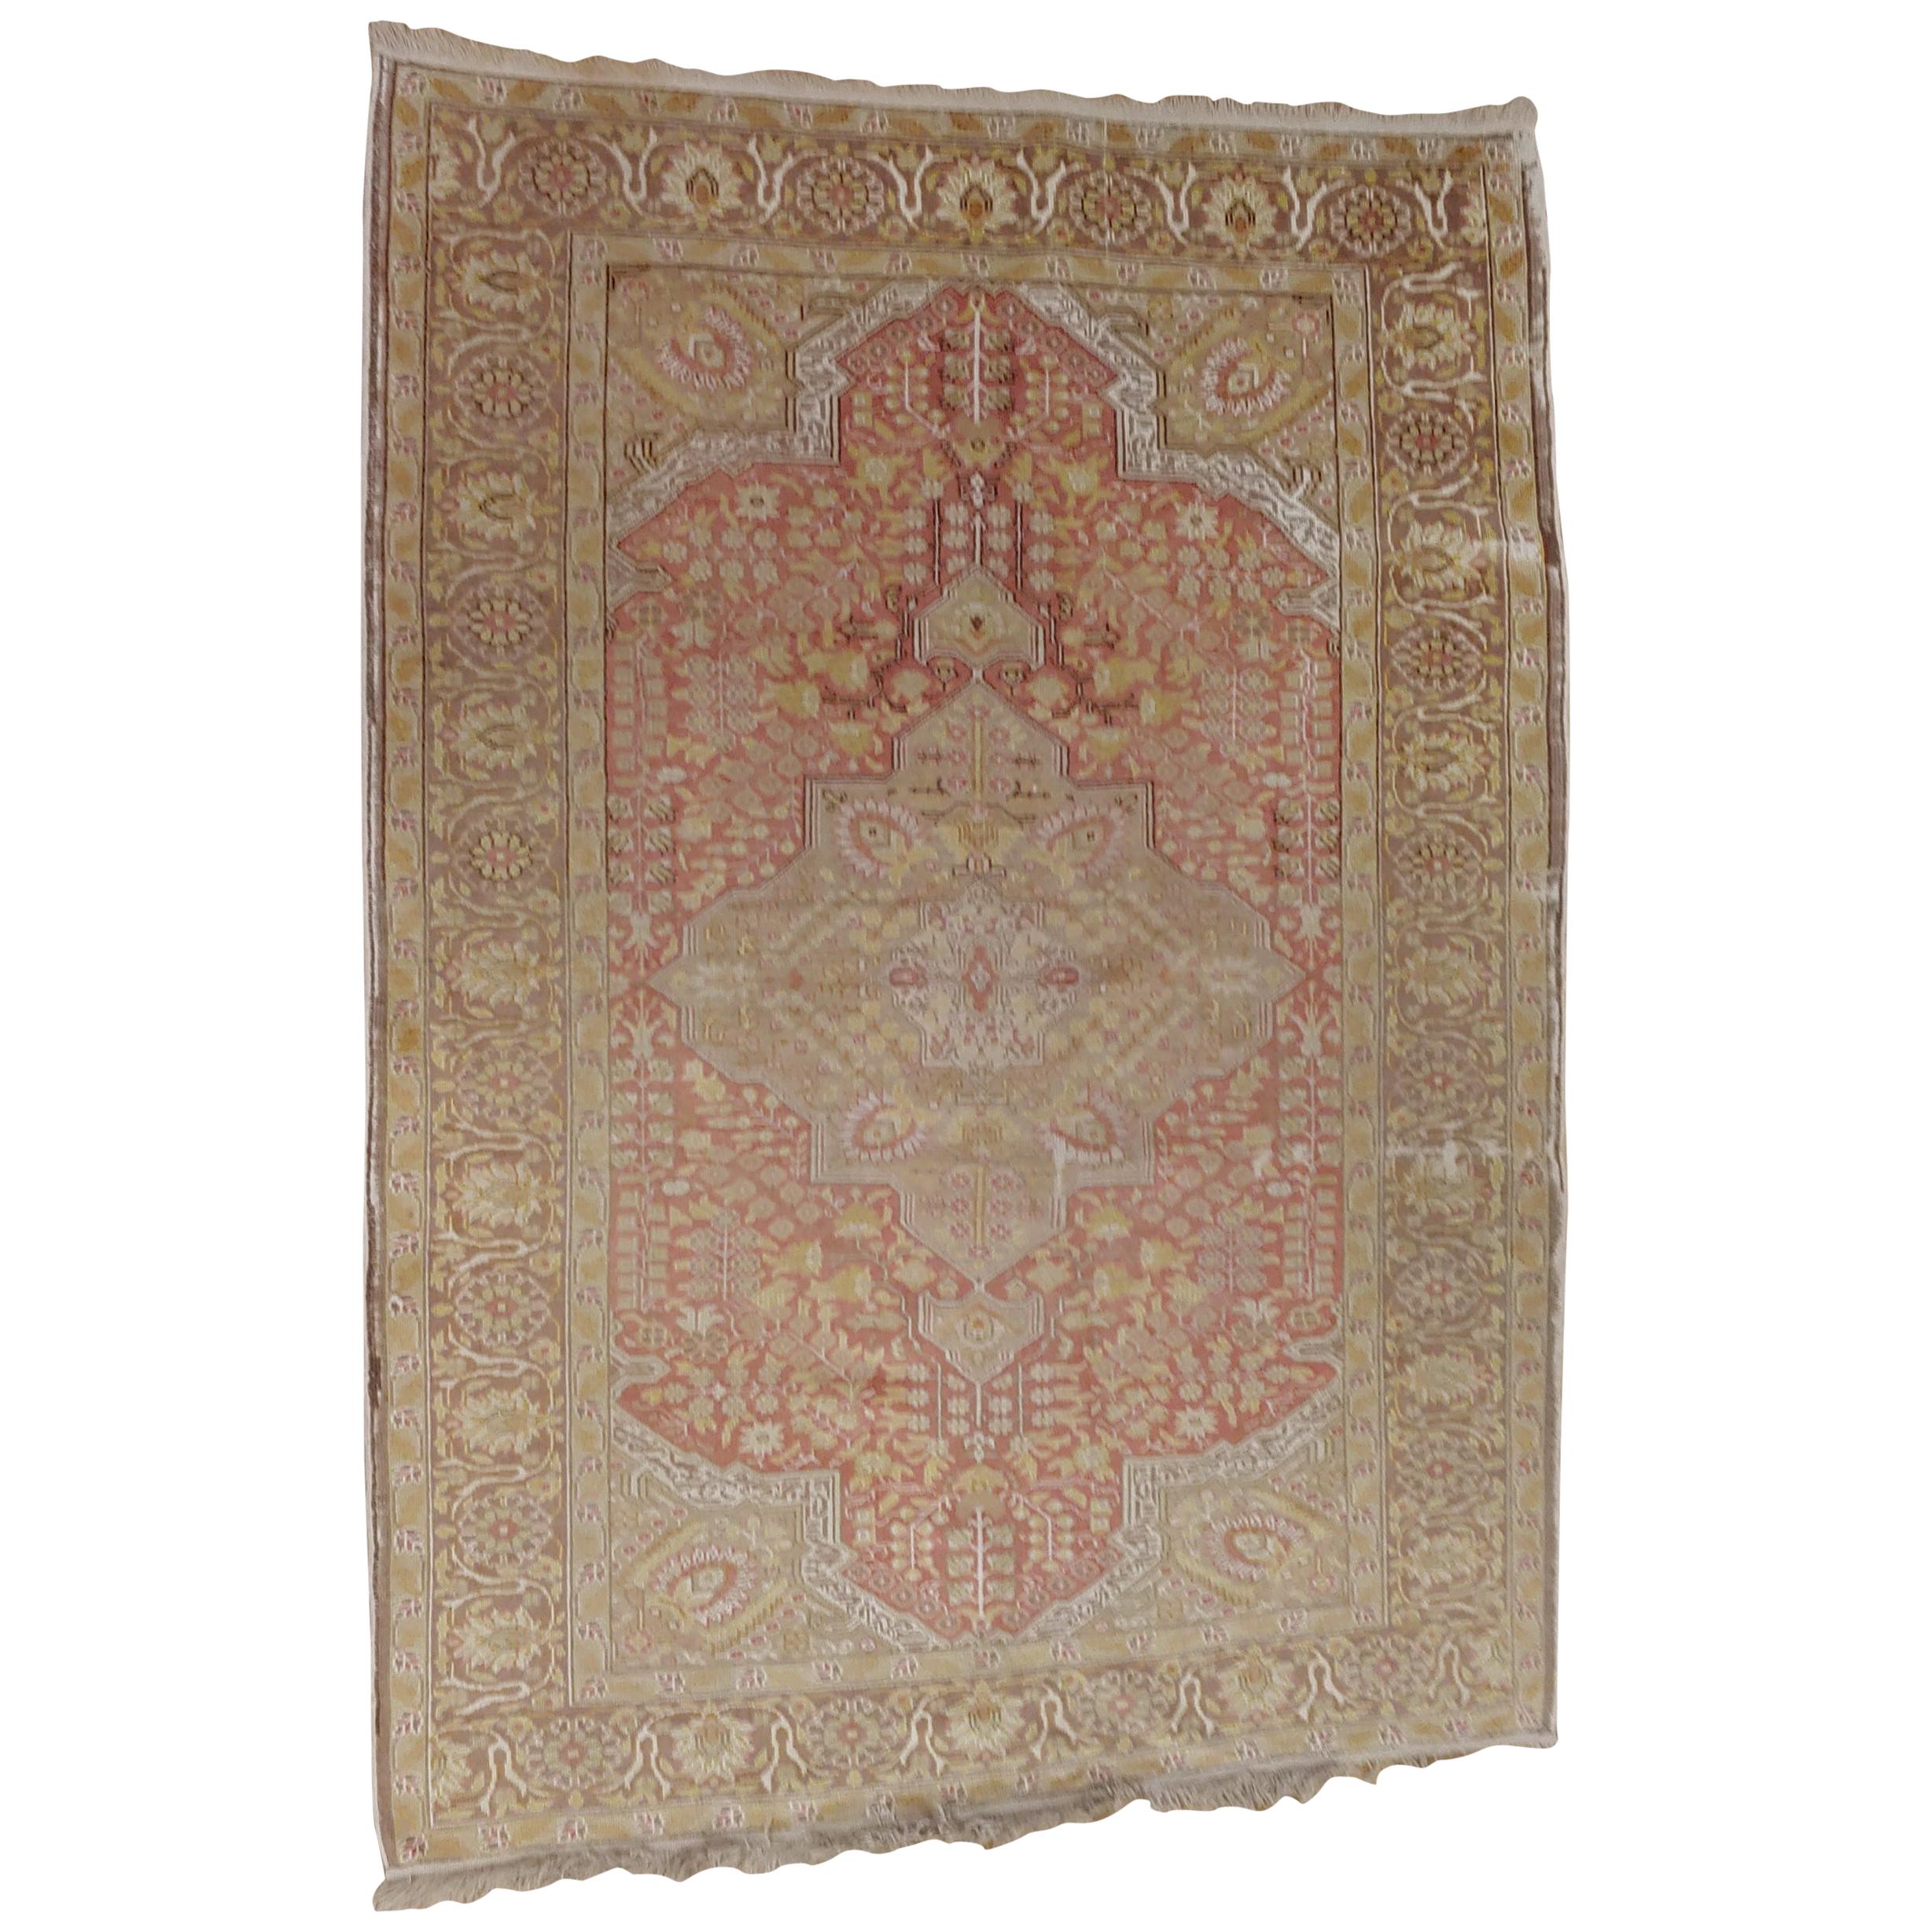 This semi-antique Turkish Sivas has very soft coral and taupe colors and the shabby chic look. It is 4-4 x 6 and has some wear consistent with the 'look'.